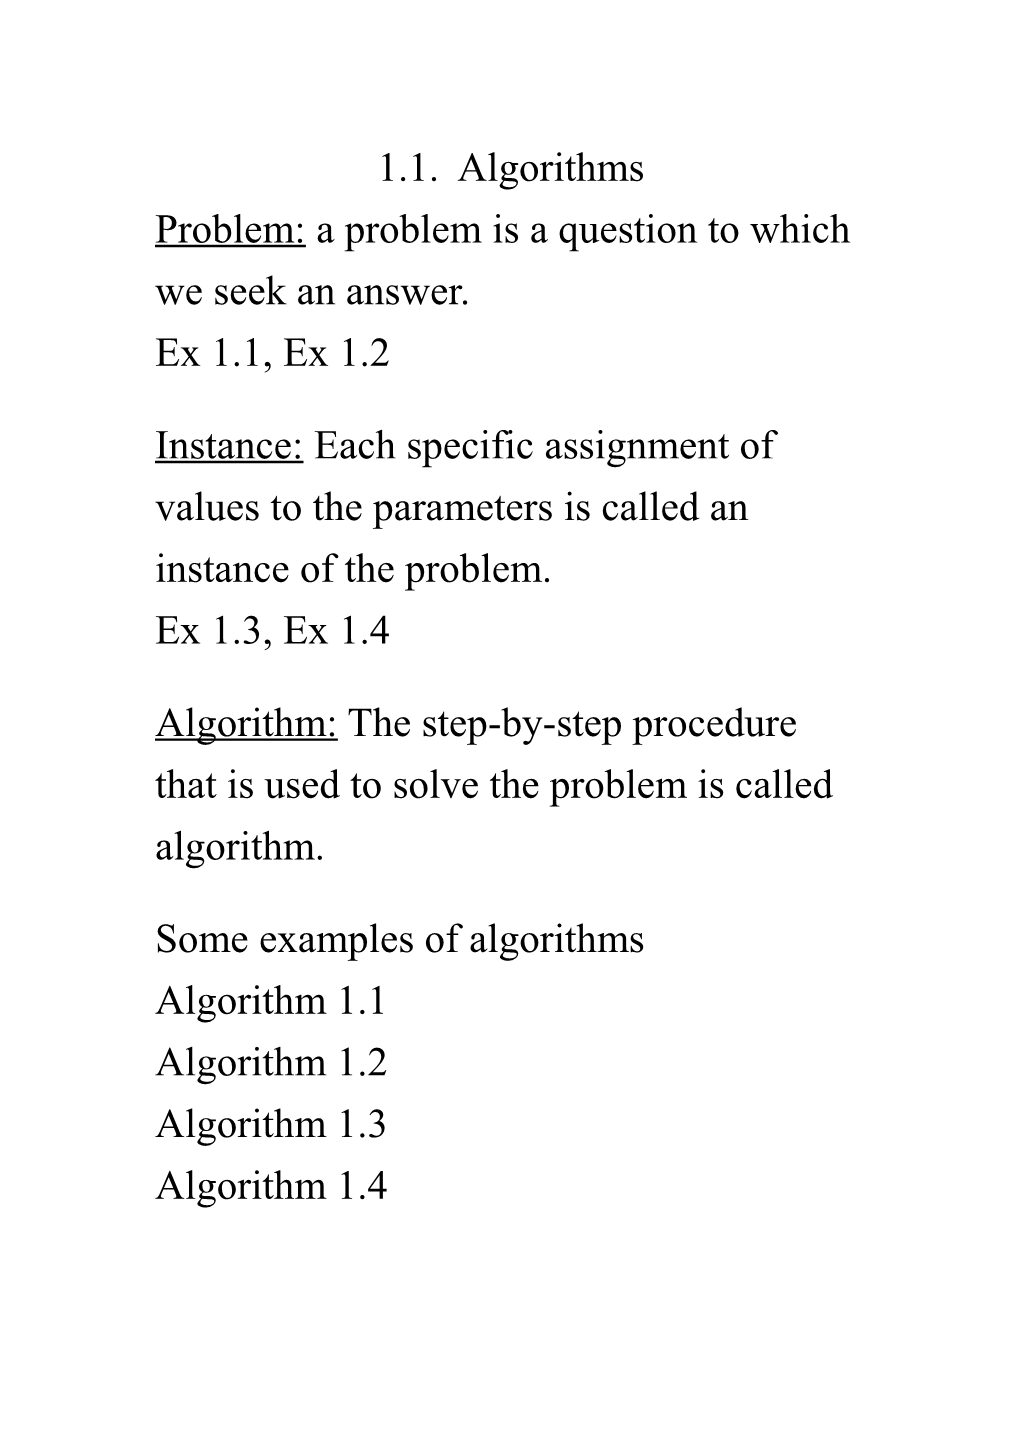 Problem: a Problem Is a Question to Which We Seek an Answer